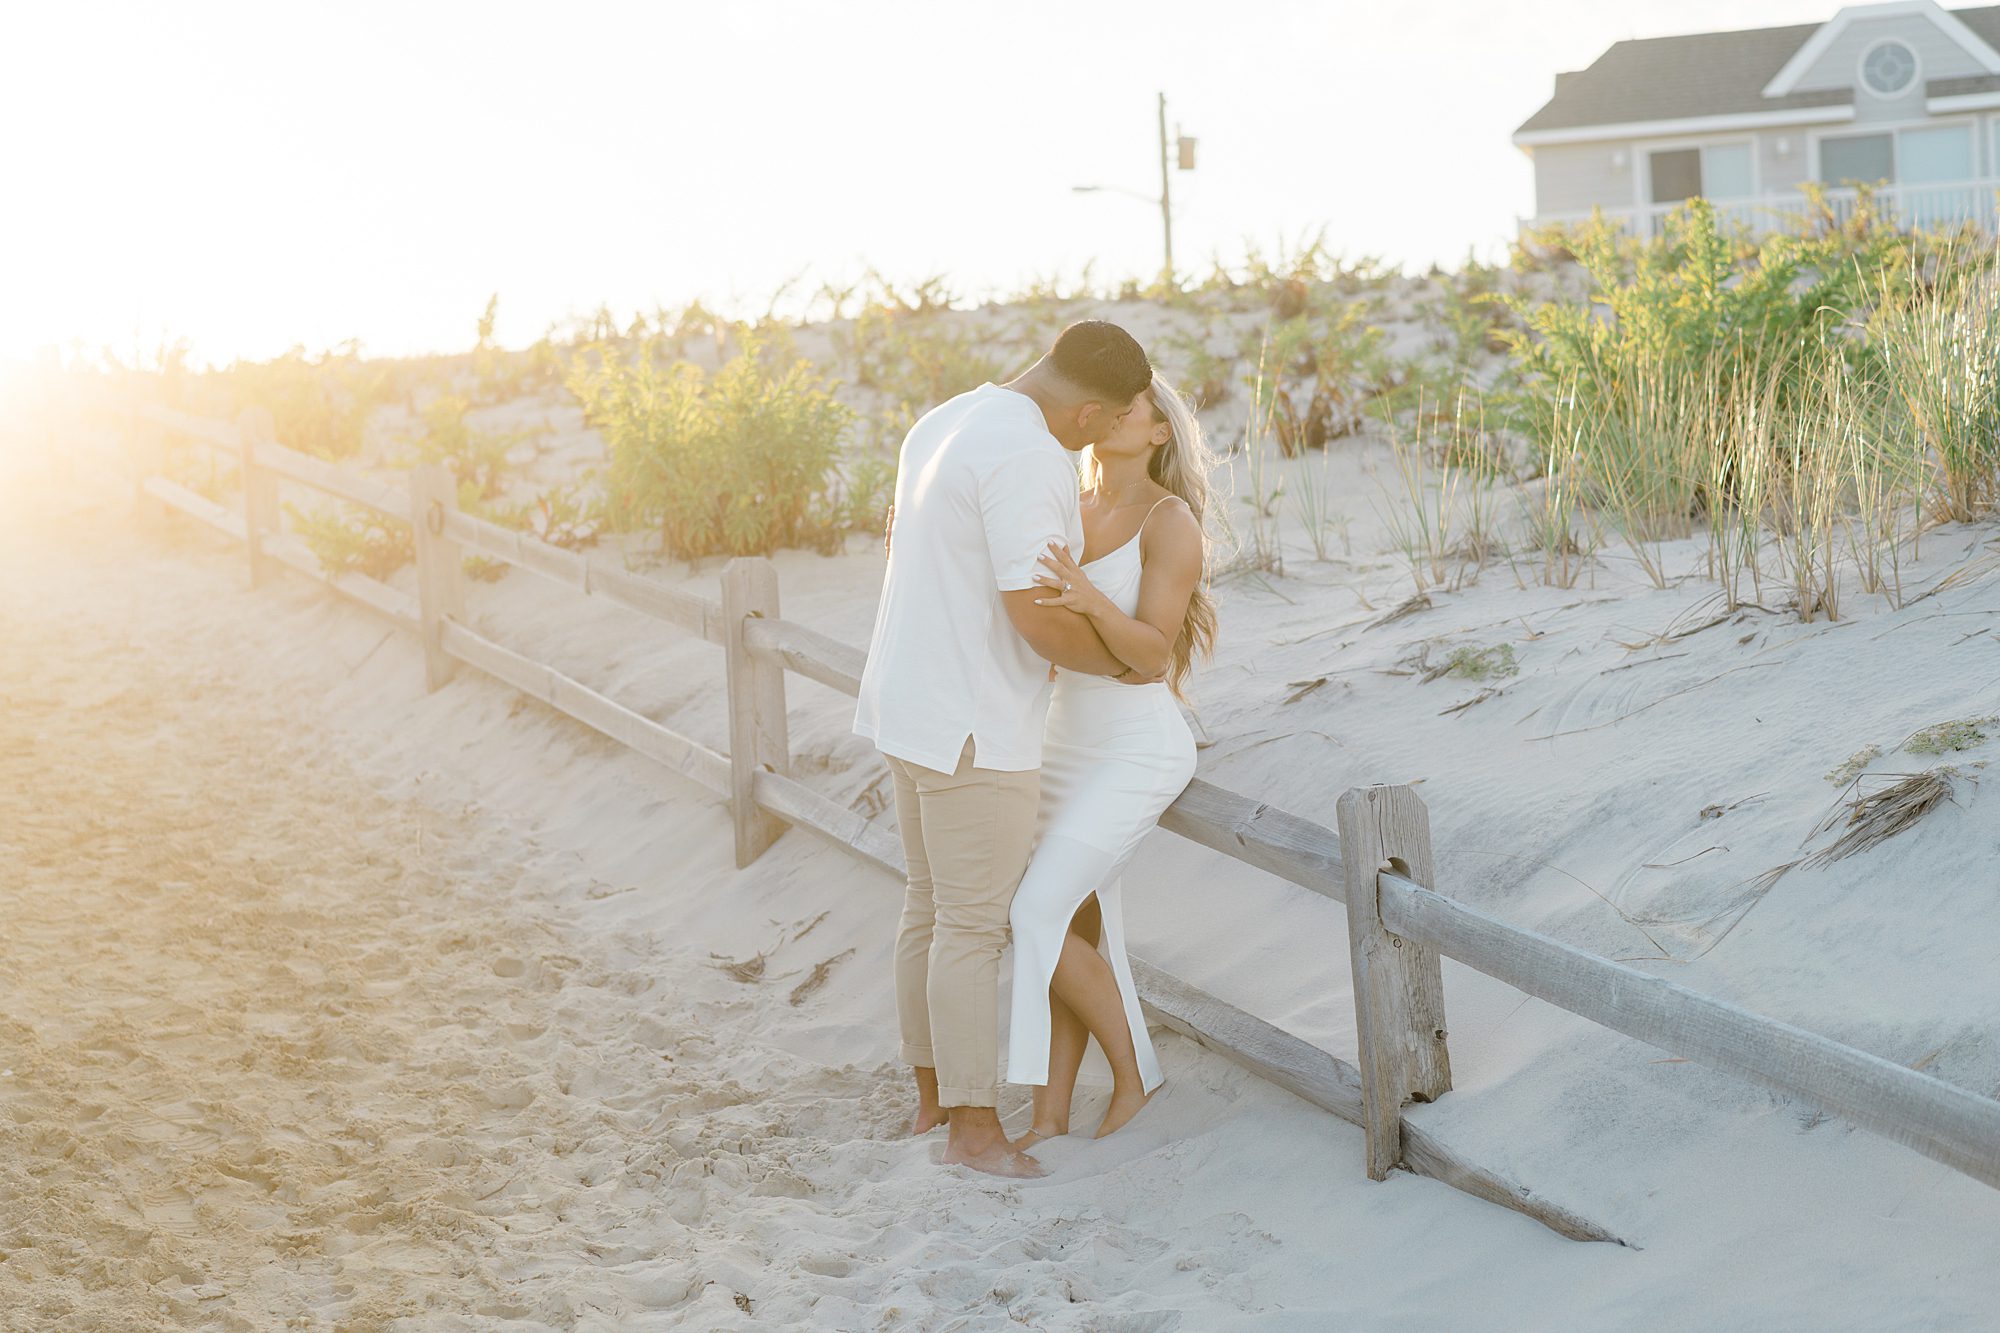 9 Styling Tips for Engagement Photos